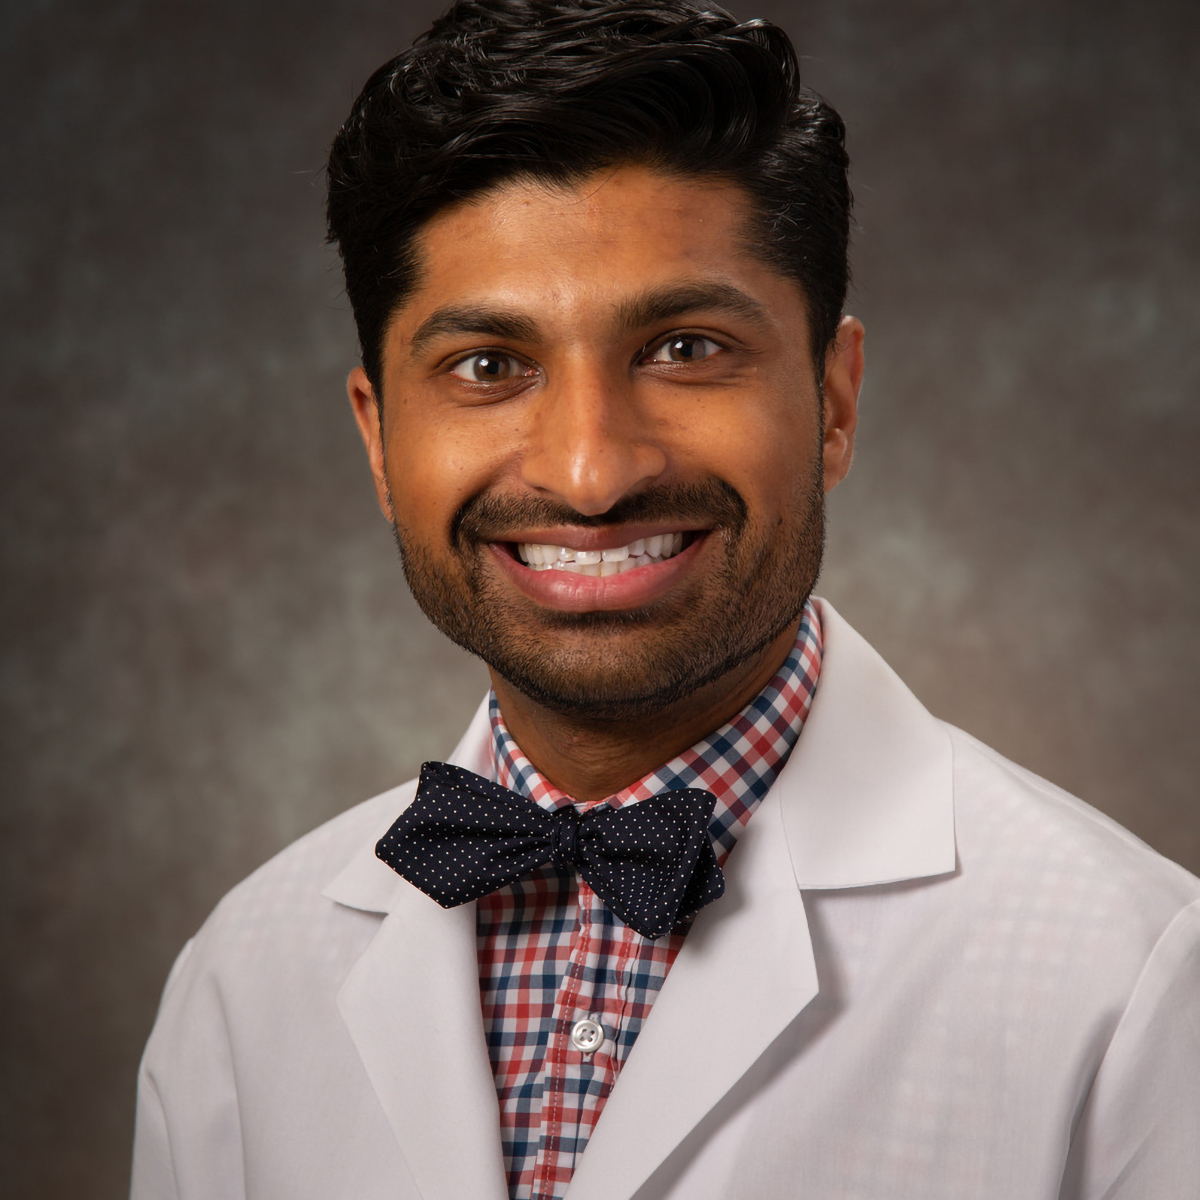 A friendly headshot of Omer Mirza, MD